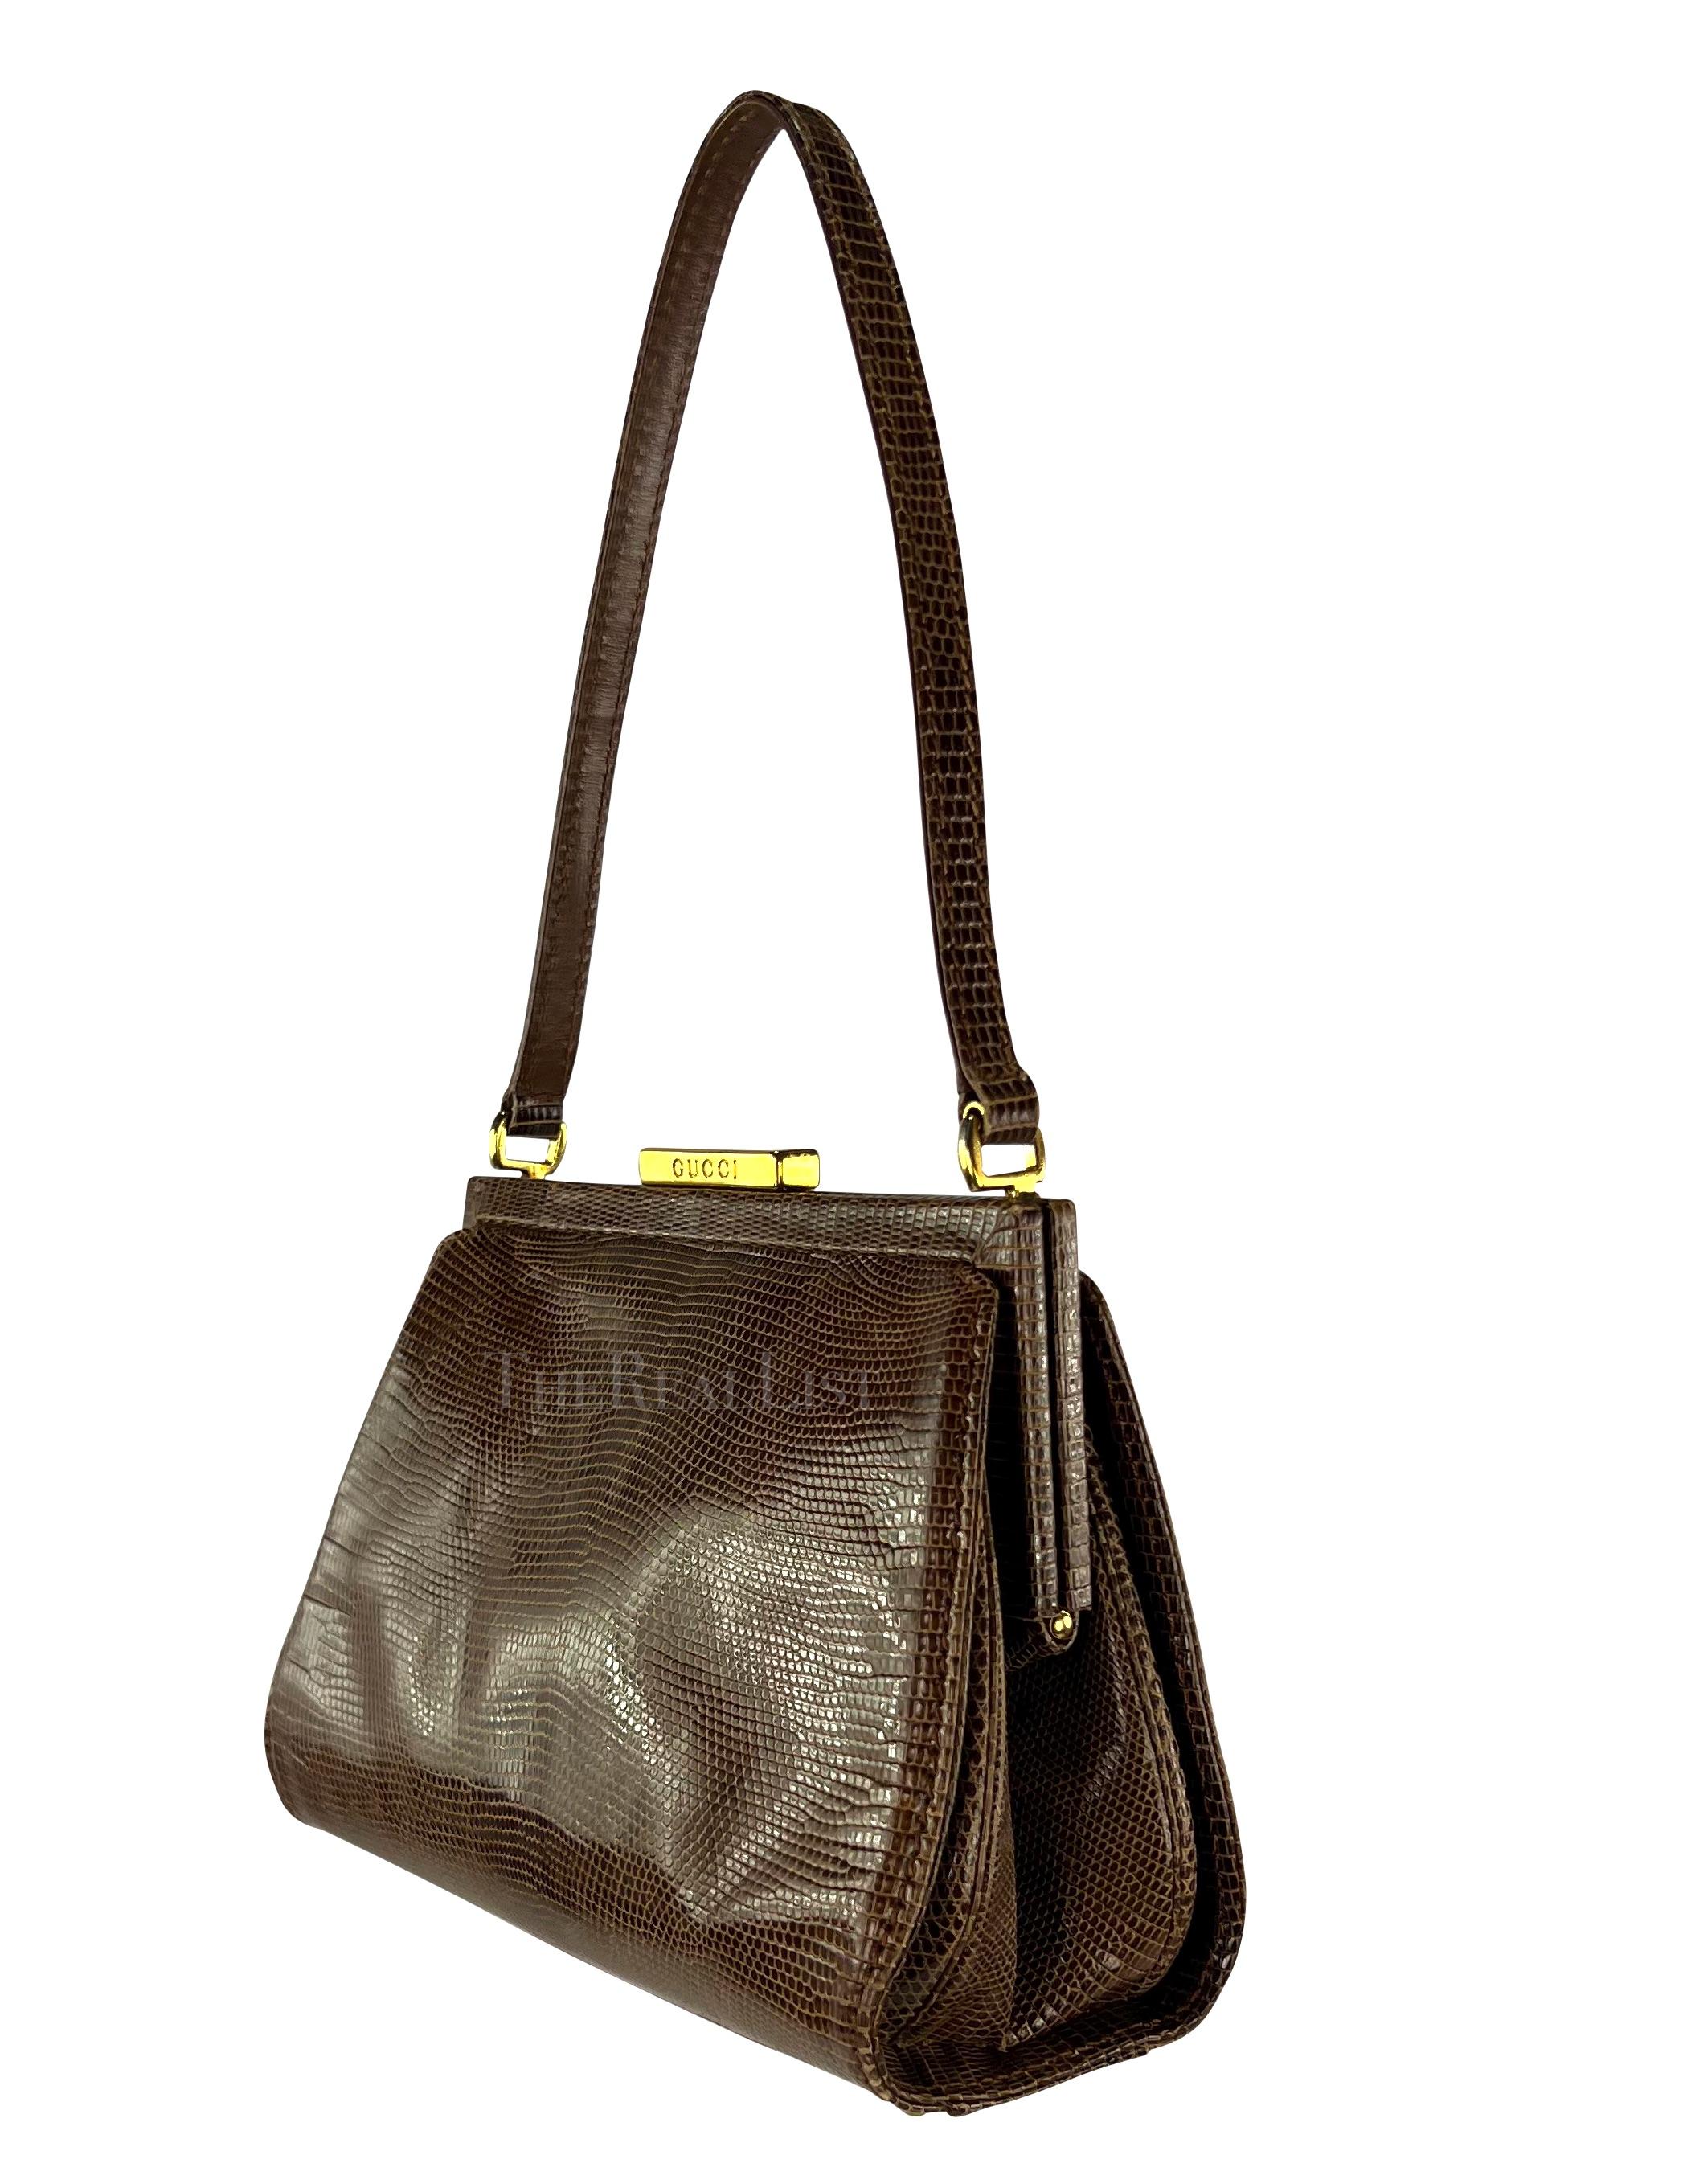 S/S 1995 Gucci by Tom Ford Tan lizard Skin Top Handle Mini Bag In Good Condition For Sale In West Hollywood, CA